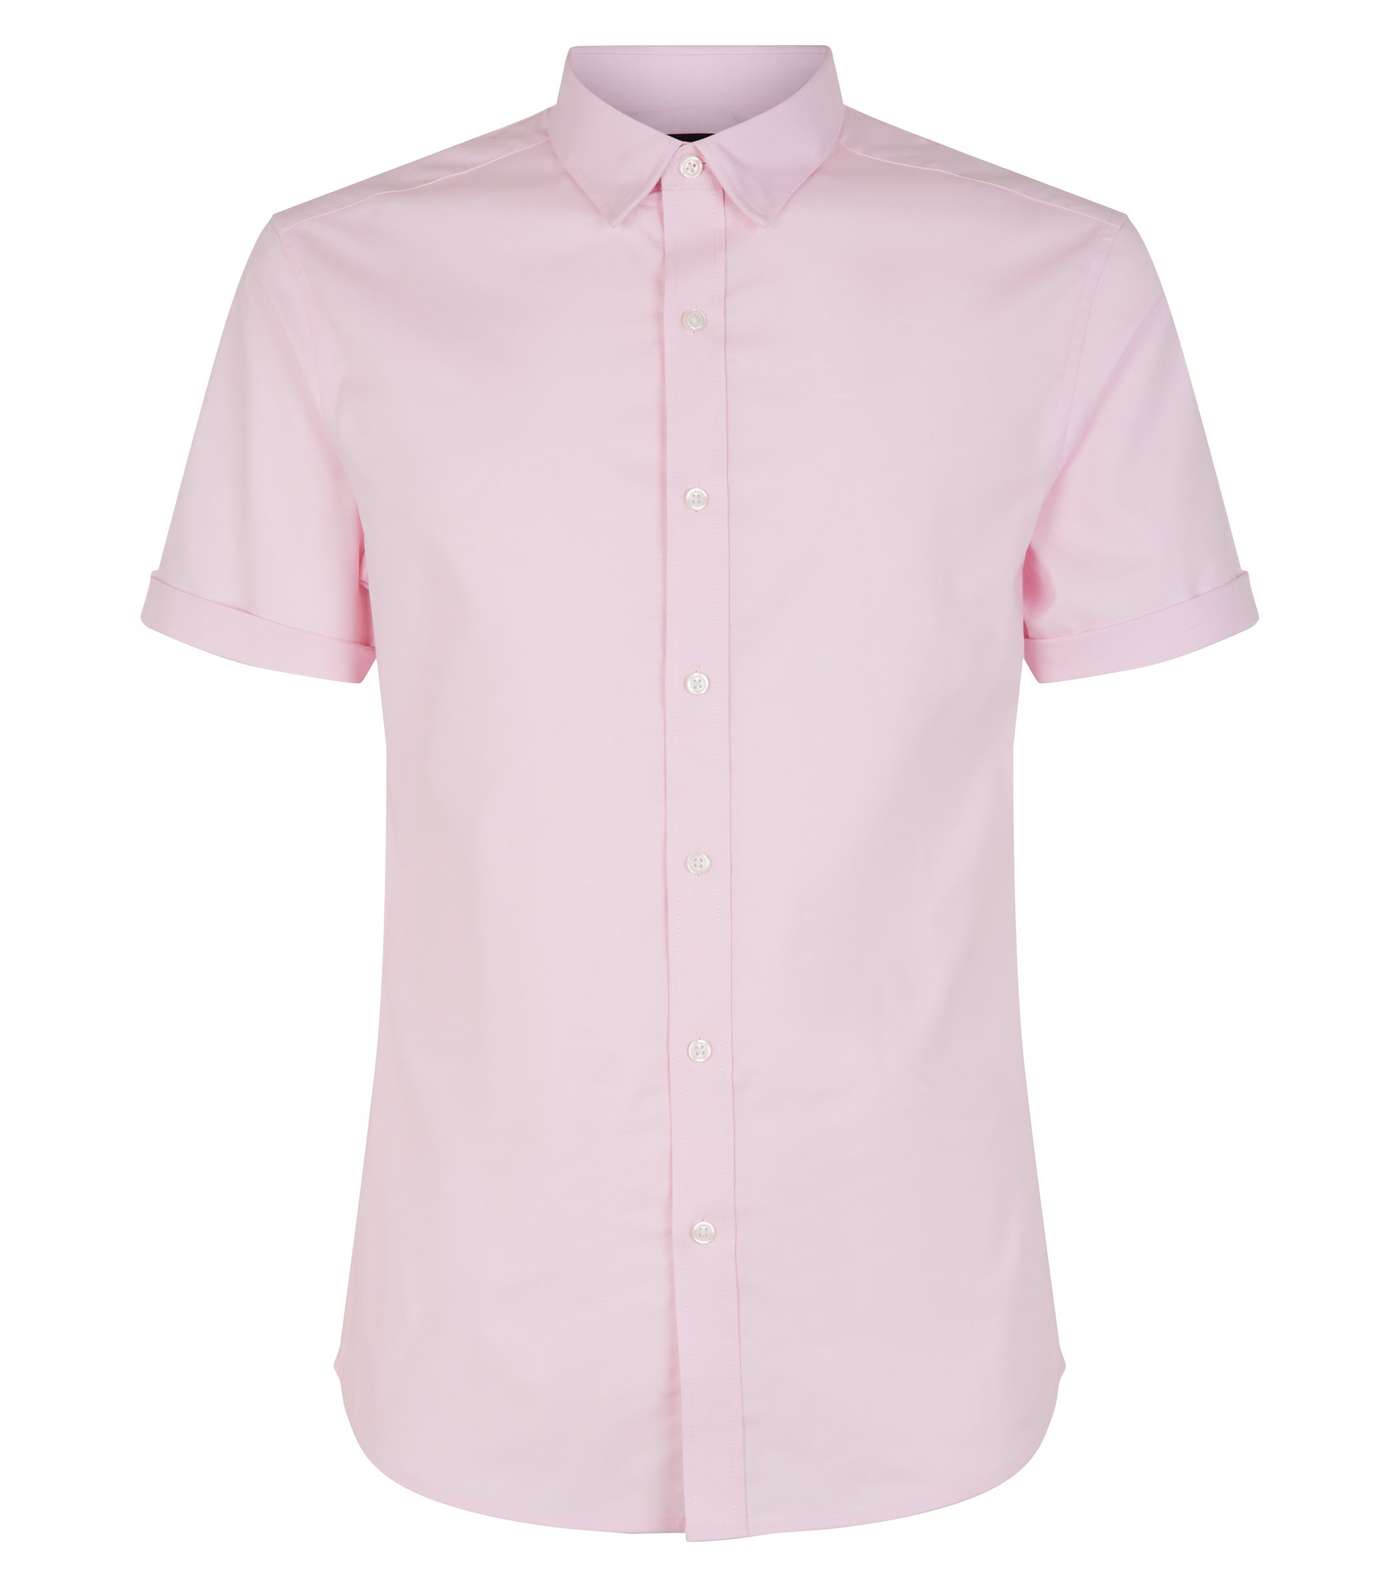 Pink Short Sleeve Muscle Fit Oxford Shirt Image 4